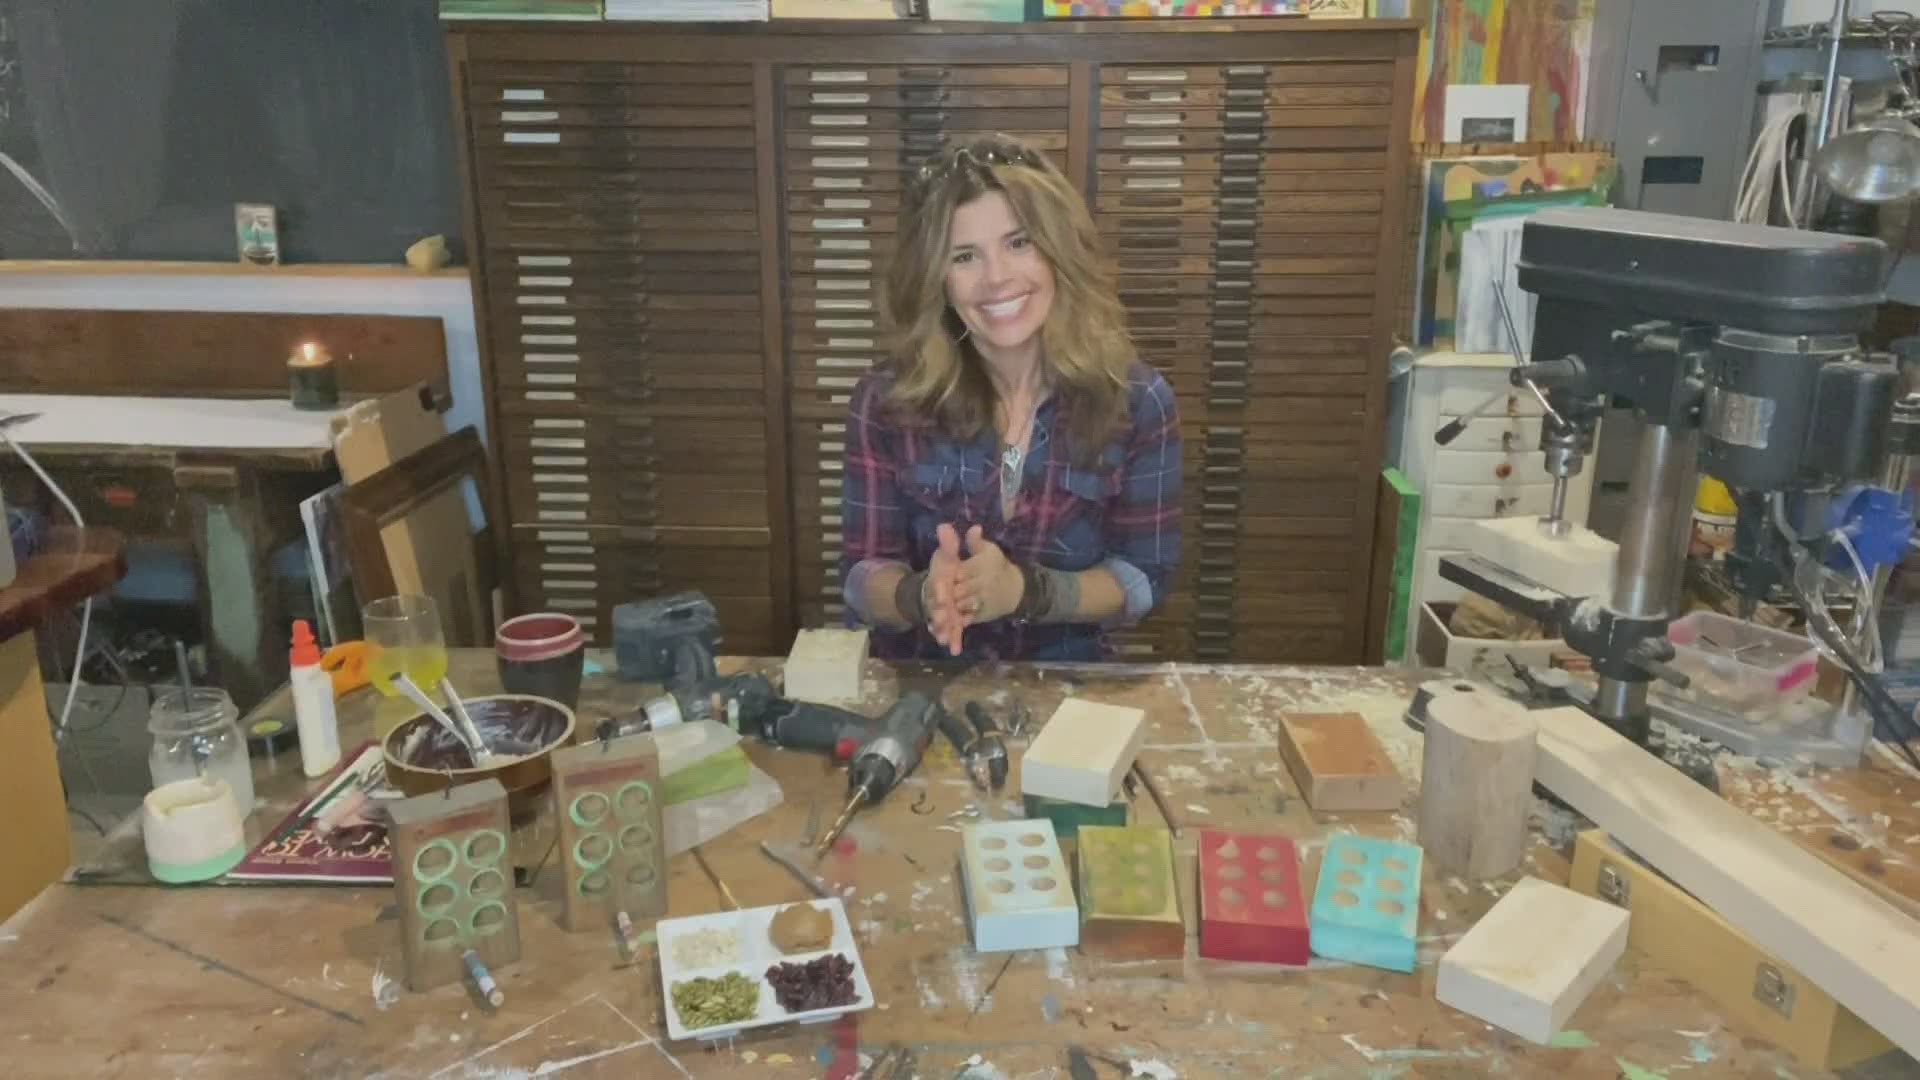 Michele creates bird feeders from 2x4s this morning on 'Iowa Live'